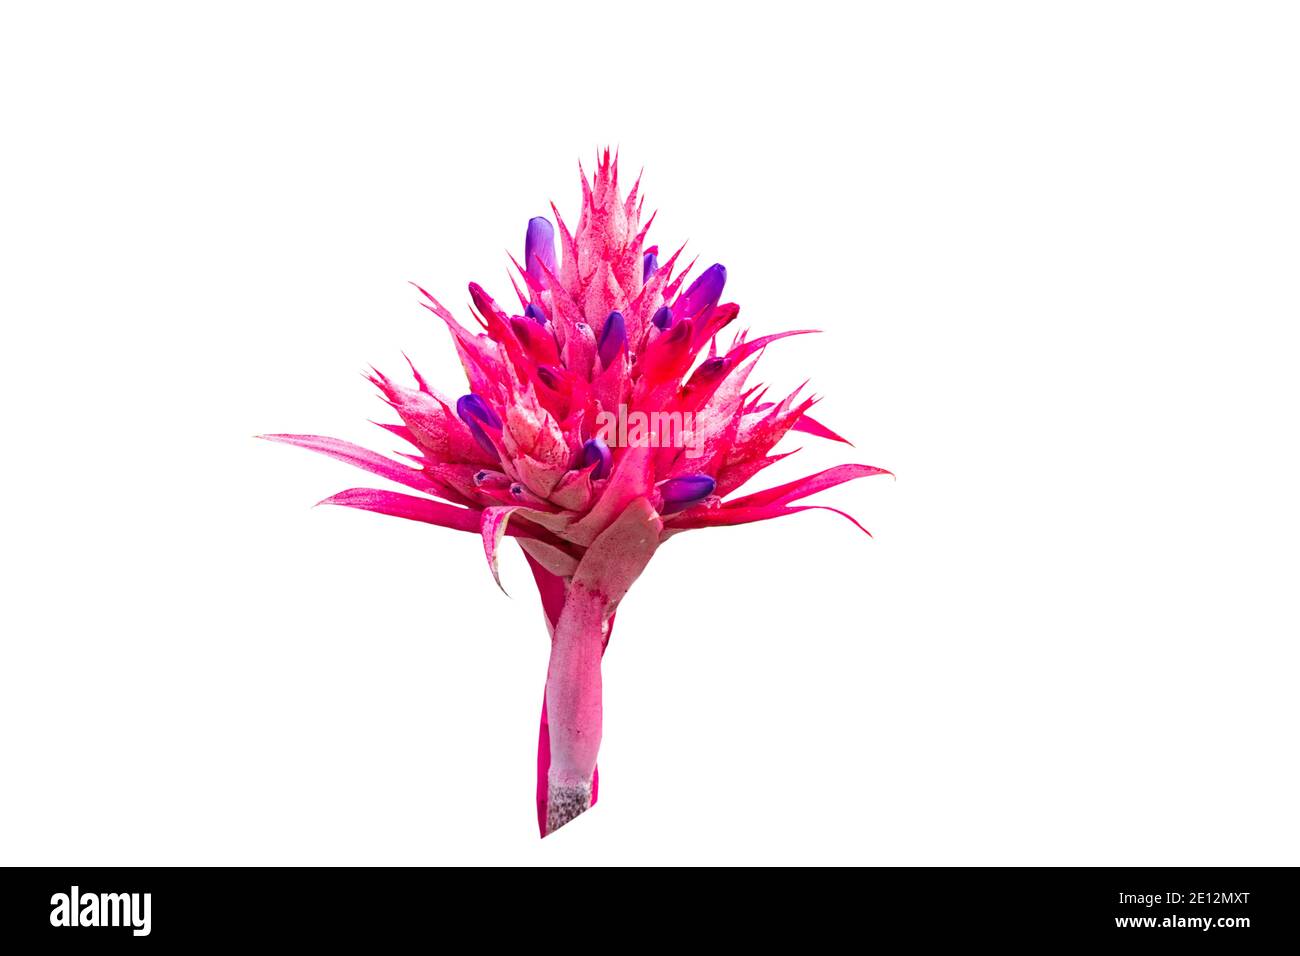 Colorful of pink  Bromeliad flower isolated on white background.Saved with clipping path. Stock Photo